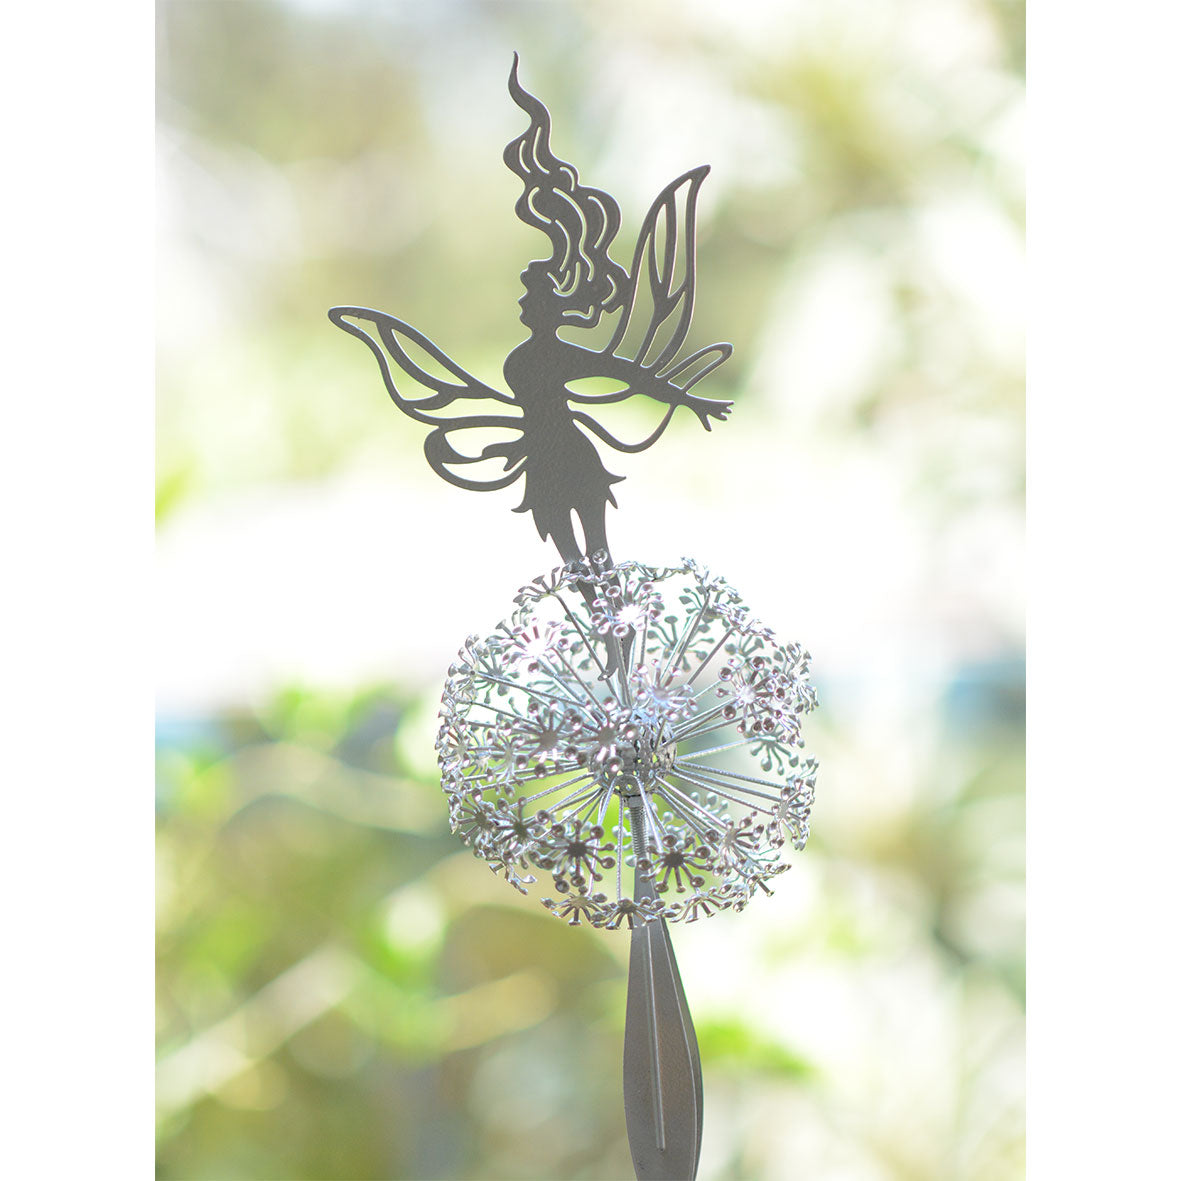 The Magical Tinker – The Dancing Fairy Steel Statue